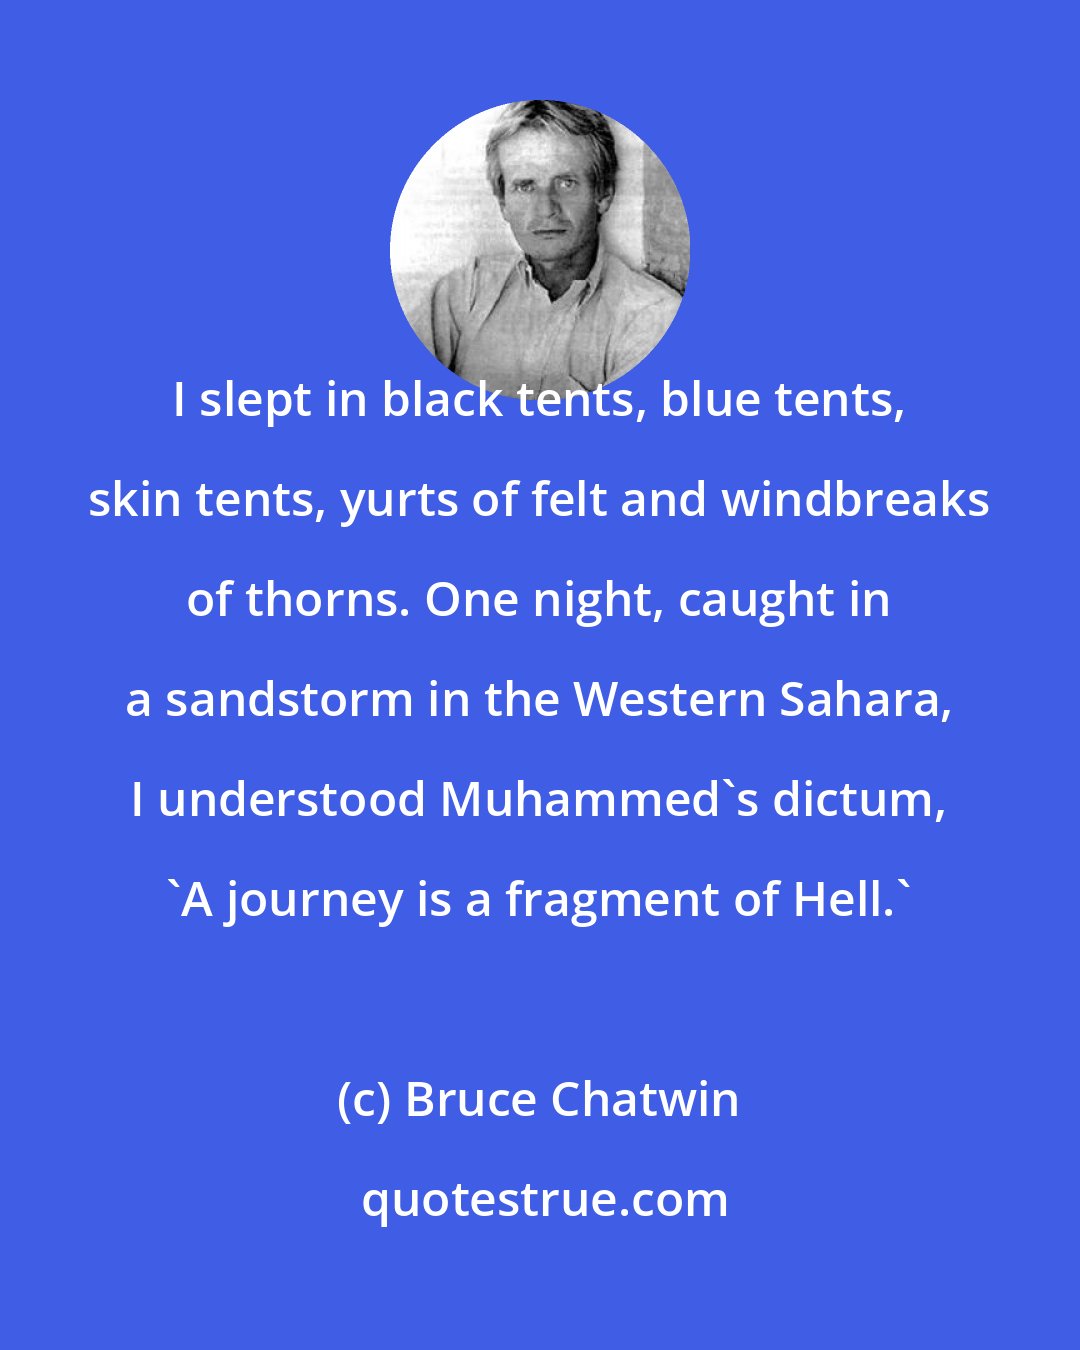 Bruce Chatwin: I slept in black tents, blue tents, skin tents, yurts of felt and windbreaks of thorns. One night, caught in a sandstorm in the Western Sahara, I understood Muhammed's dictum, 'A journey is a fragment of Hell.'